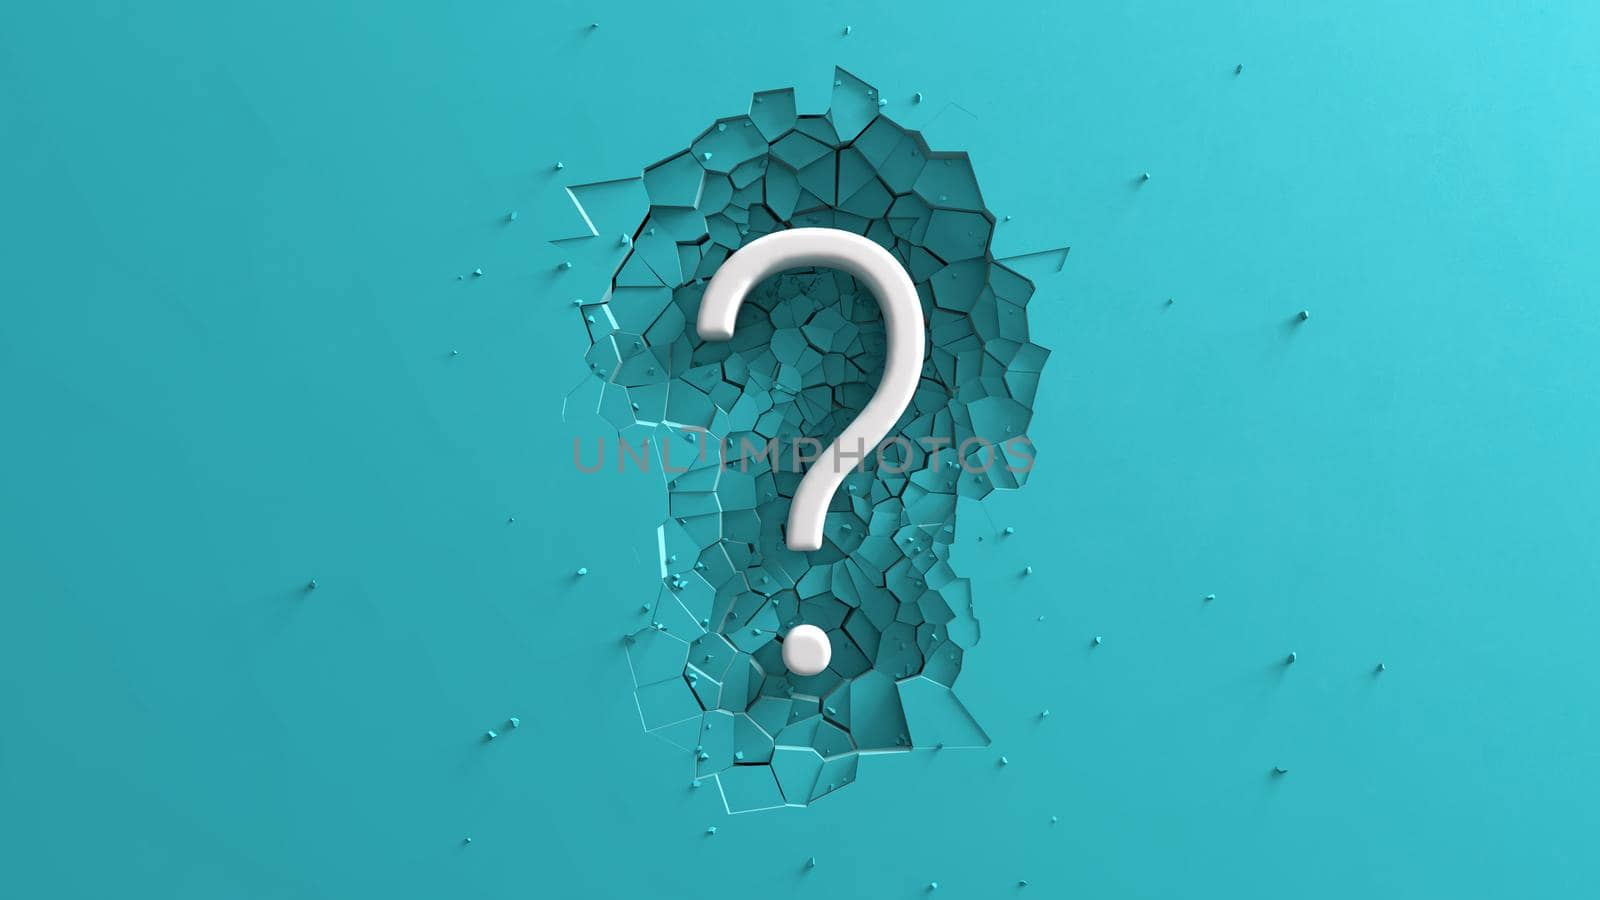 Large White Question mark symbol on Teal background with impact effect breaking floor 3D render.